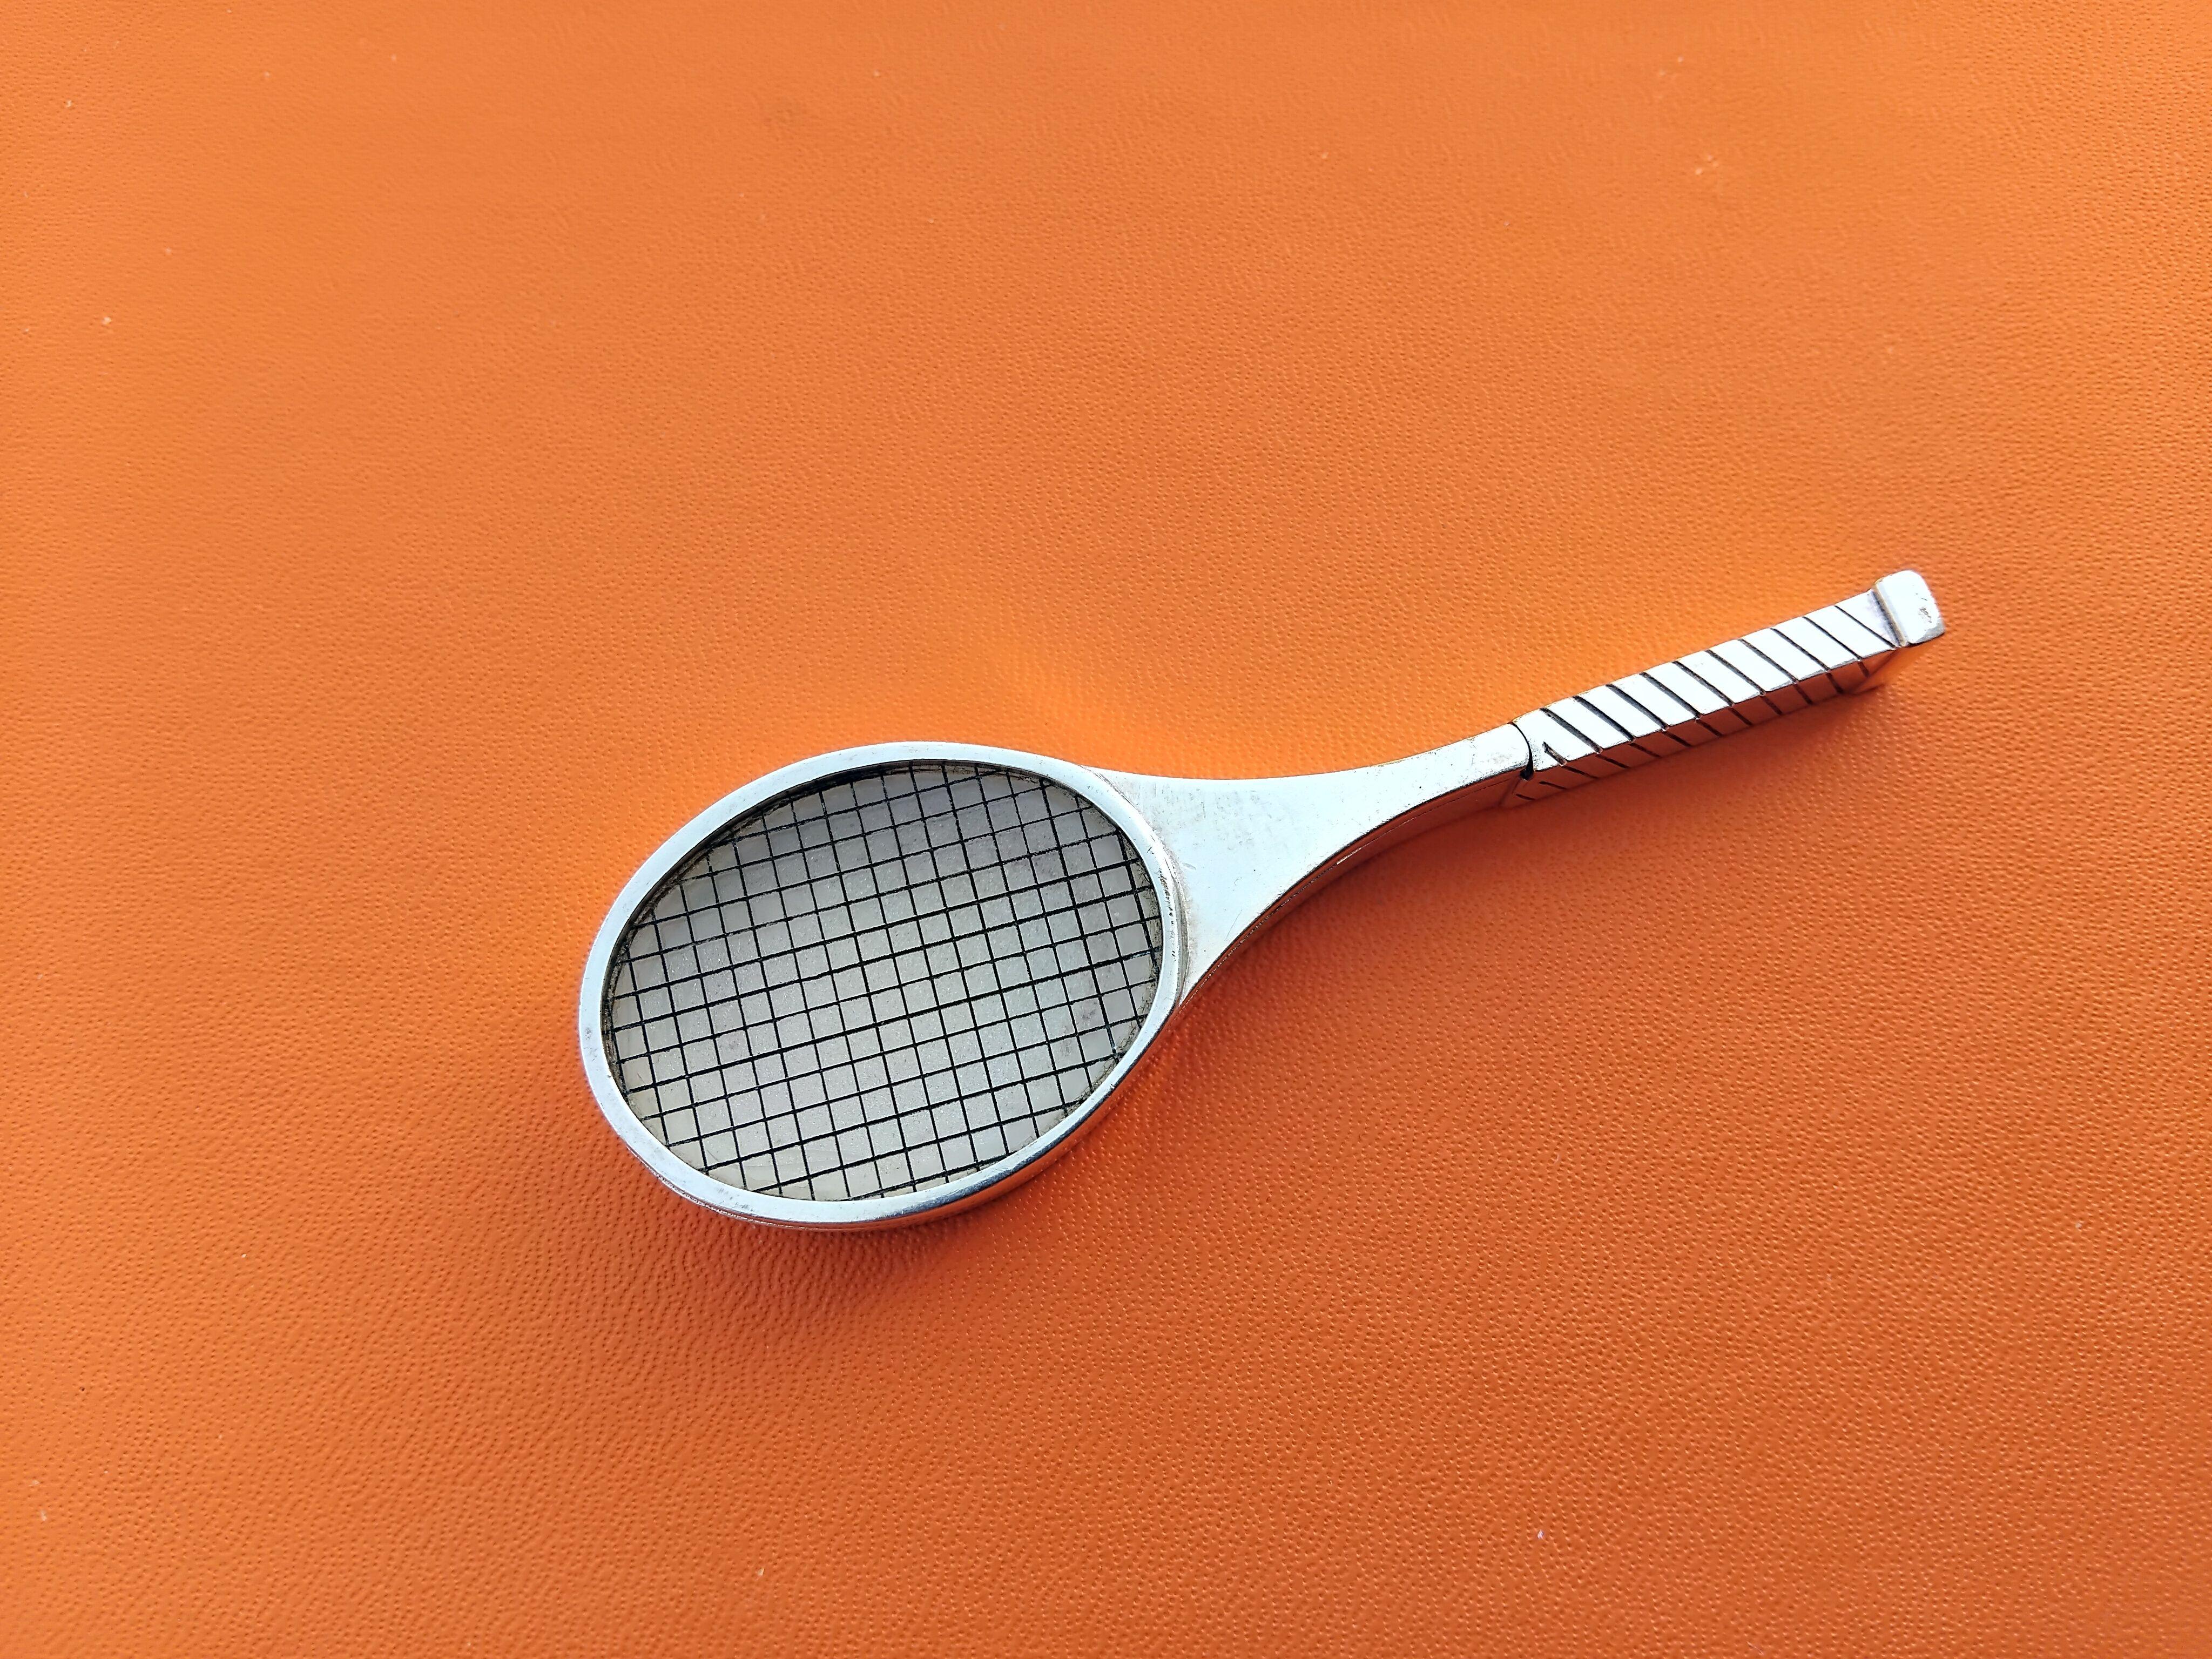 Rare and Collectible Authentic Hermès Pill Box

Tennis Racquet Shaped

Vintage item

Made of metal, answers to the silver test

The lid is made of transparent plastic on which are drawn lines representing the ropes of the racquet

Opens by sliding